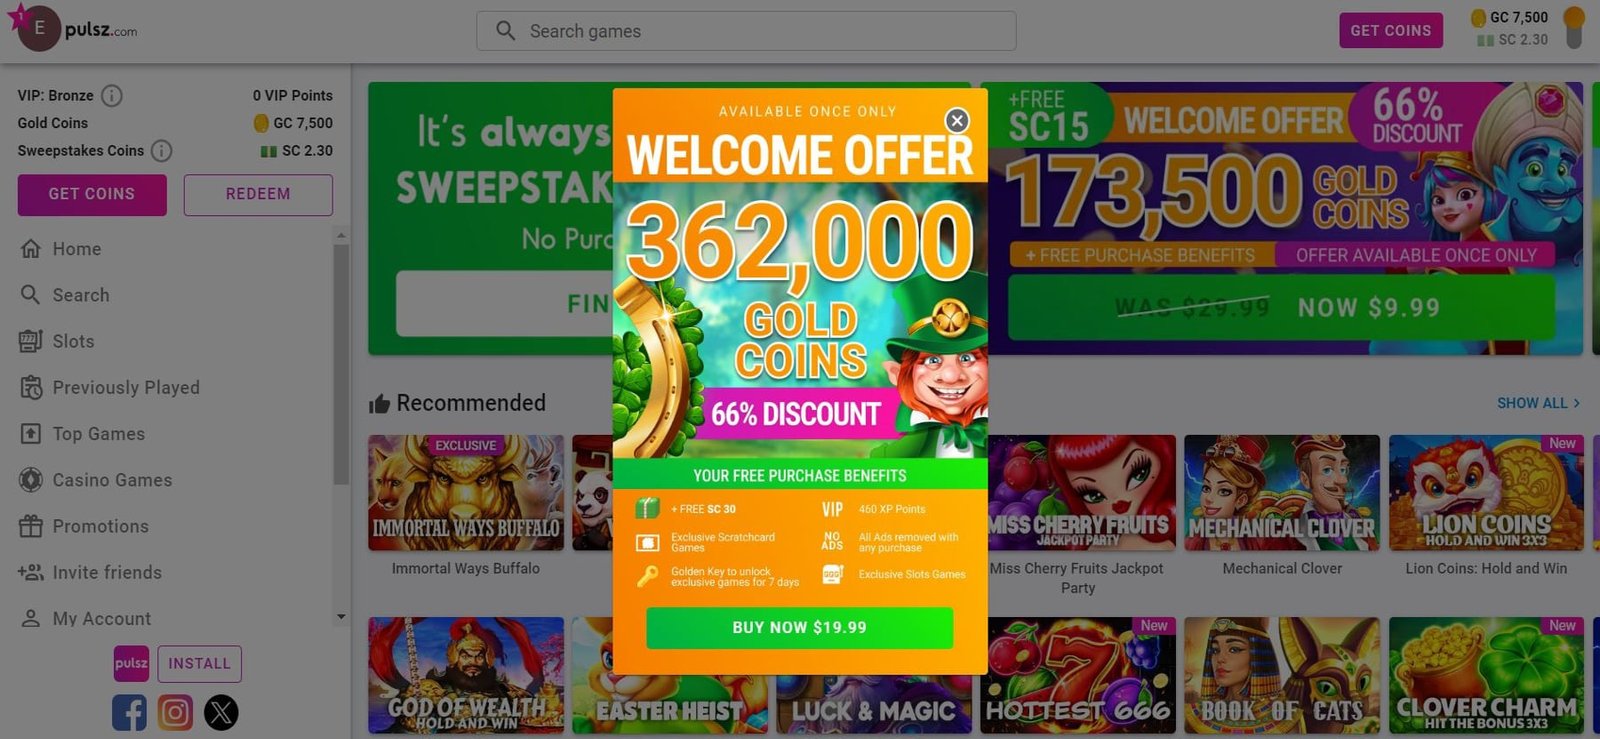 Pulsz Casino Welcome Offers